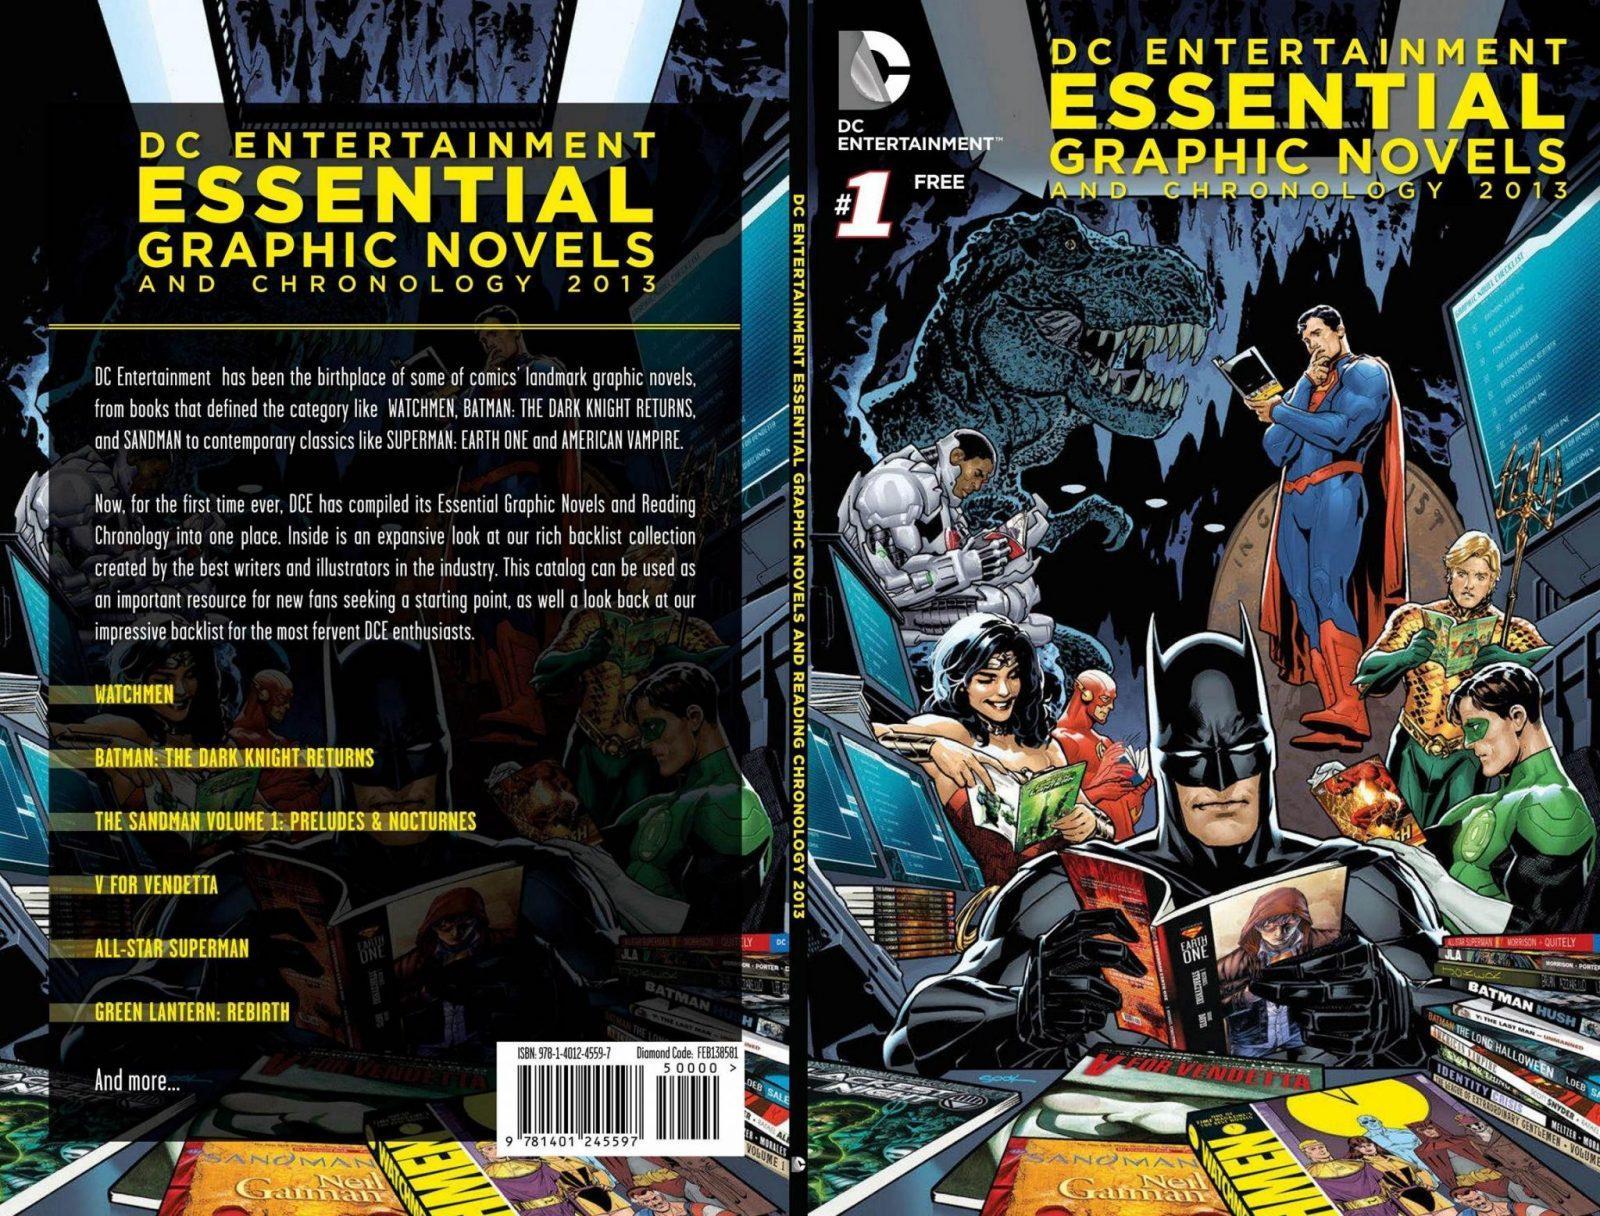 DC's iEssential 25 Graphic Novels